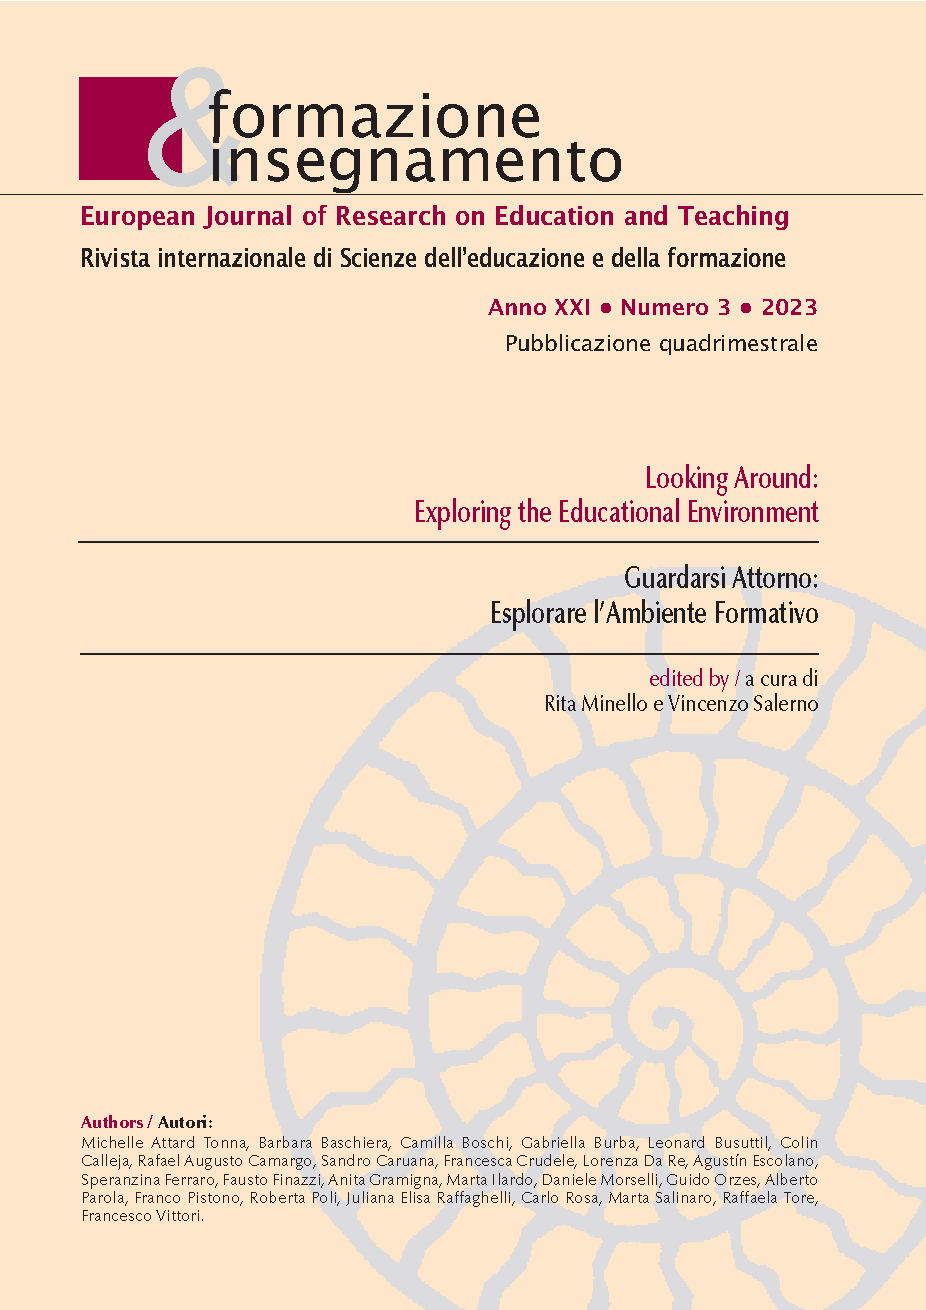 					View Vol. 21 No. 3 (2023): Looking Around: Exploring the Educational Environment
				